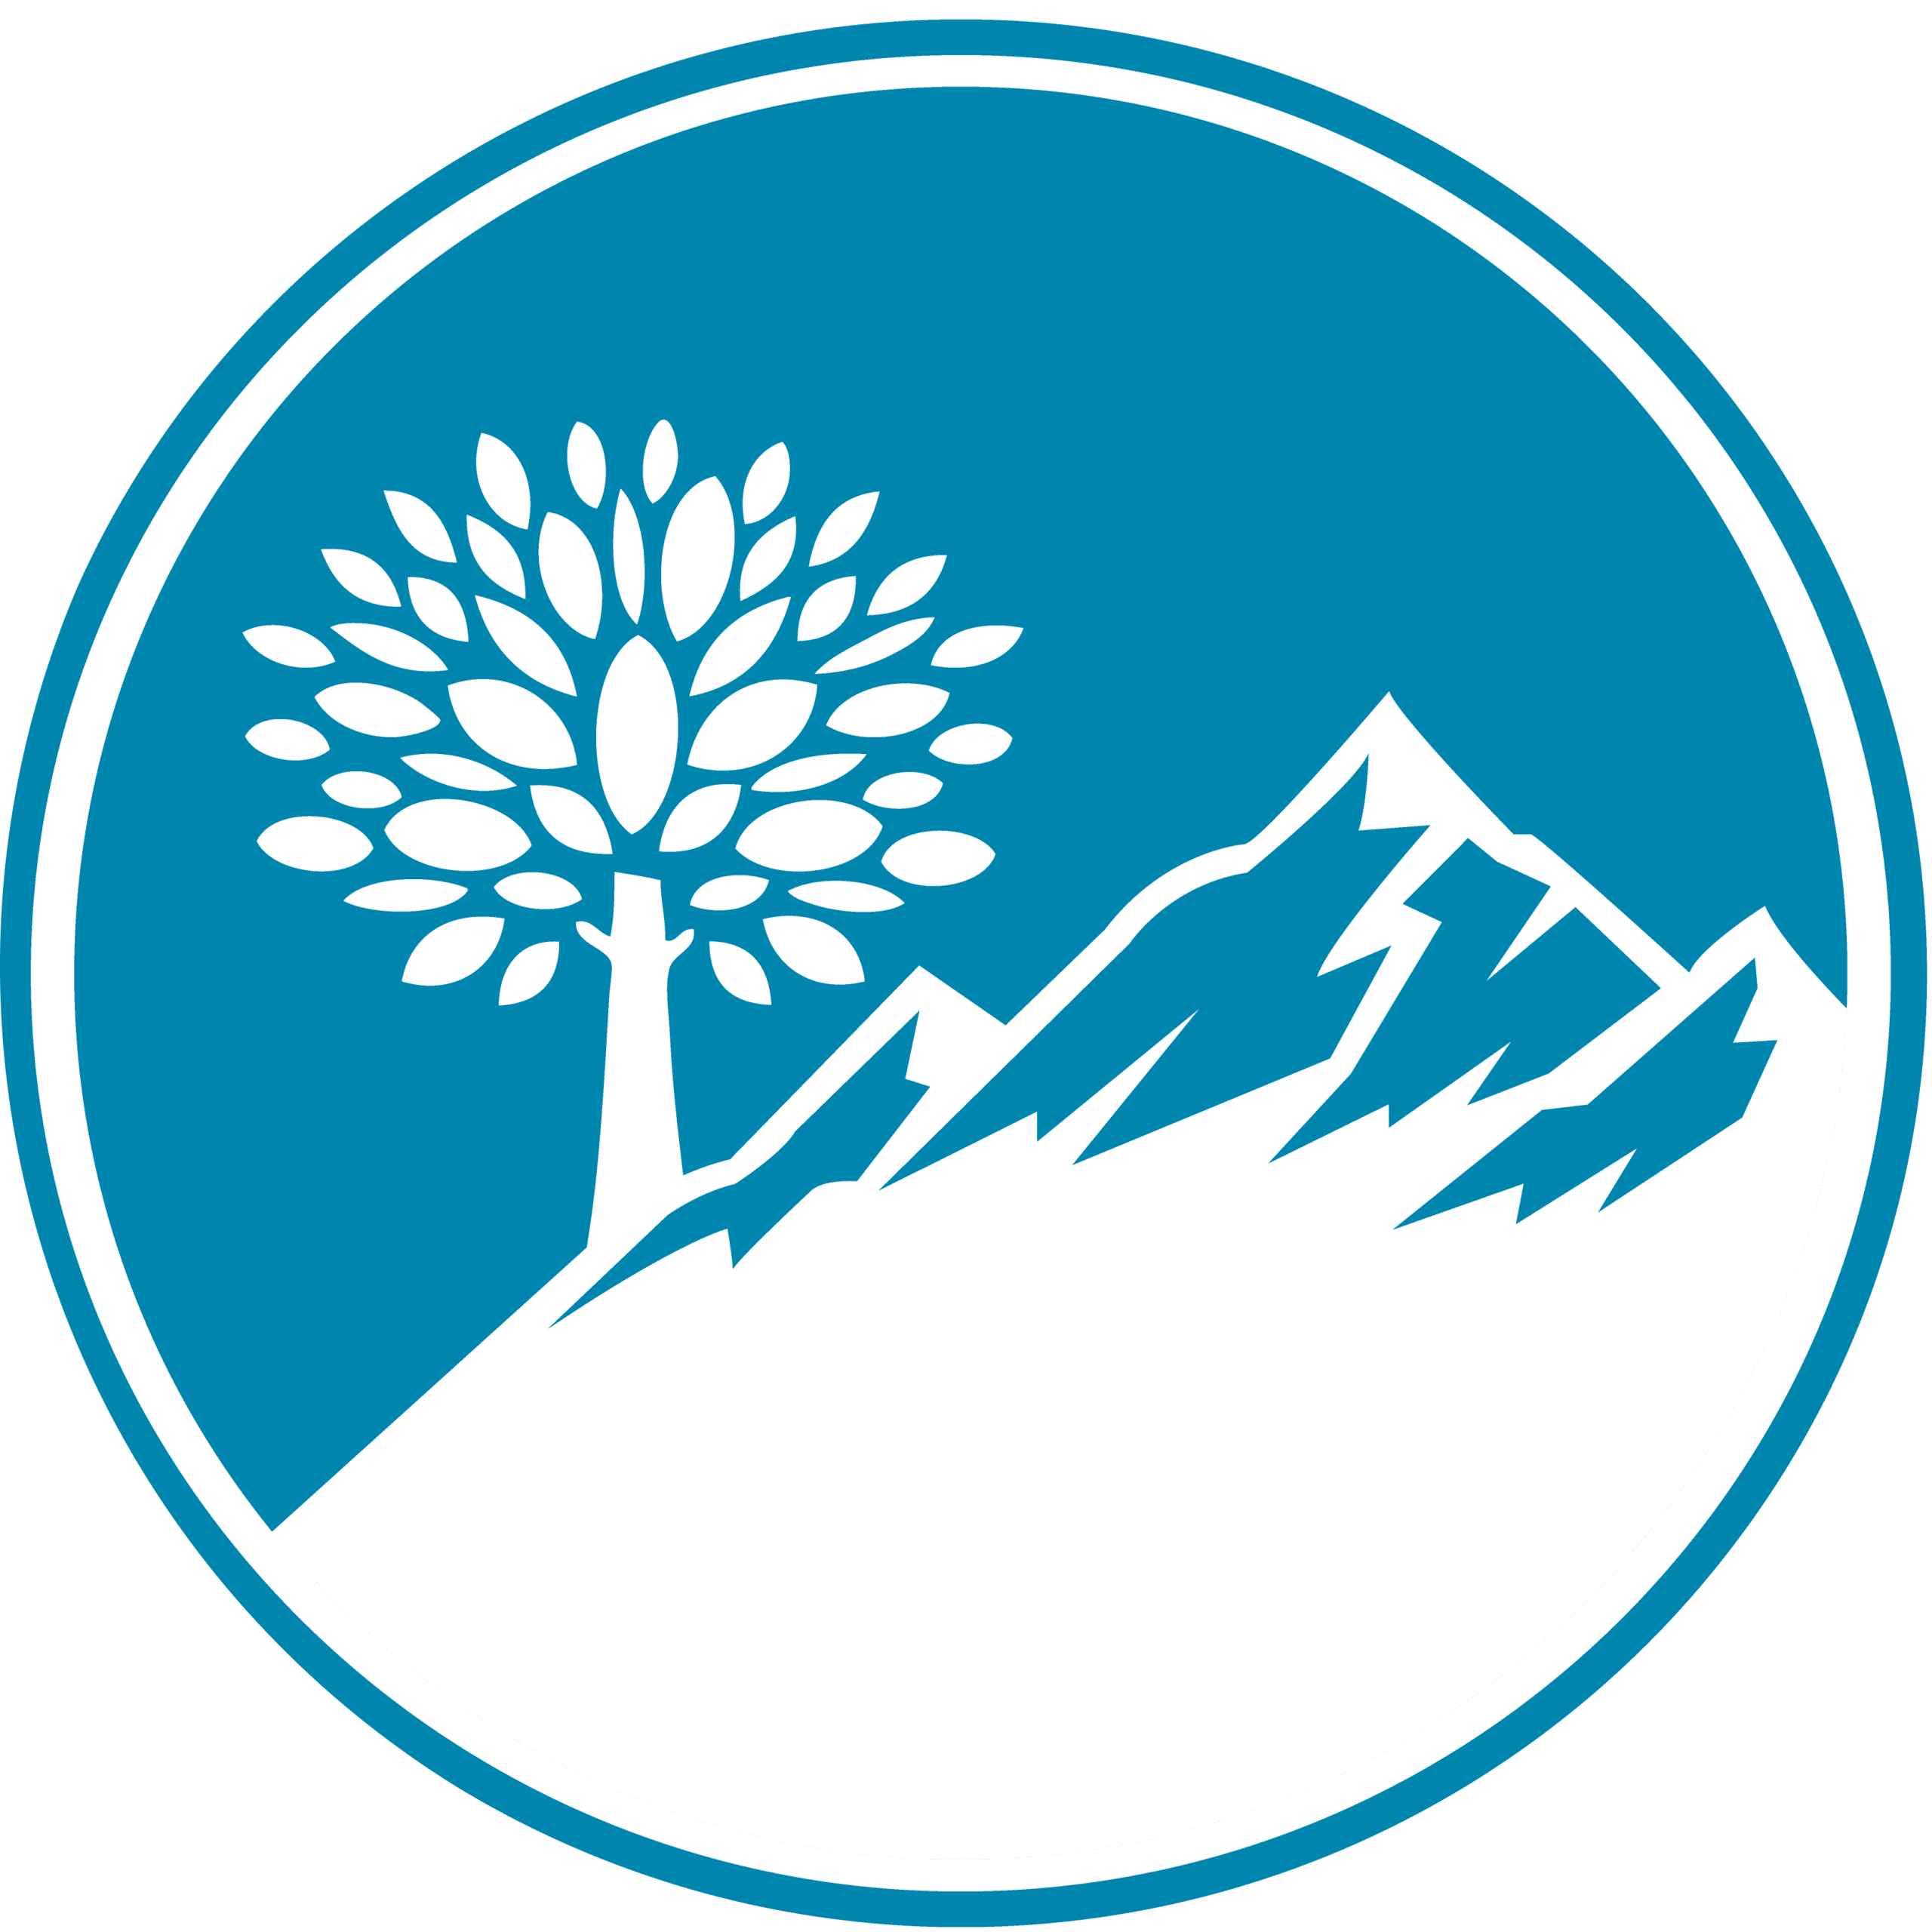 Denver Mental Health and Counseling